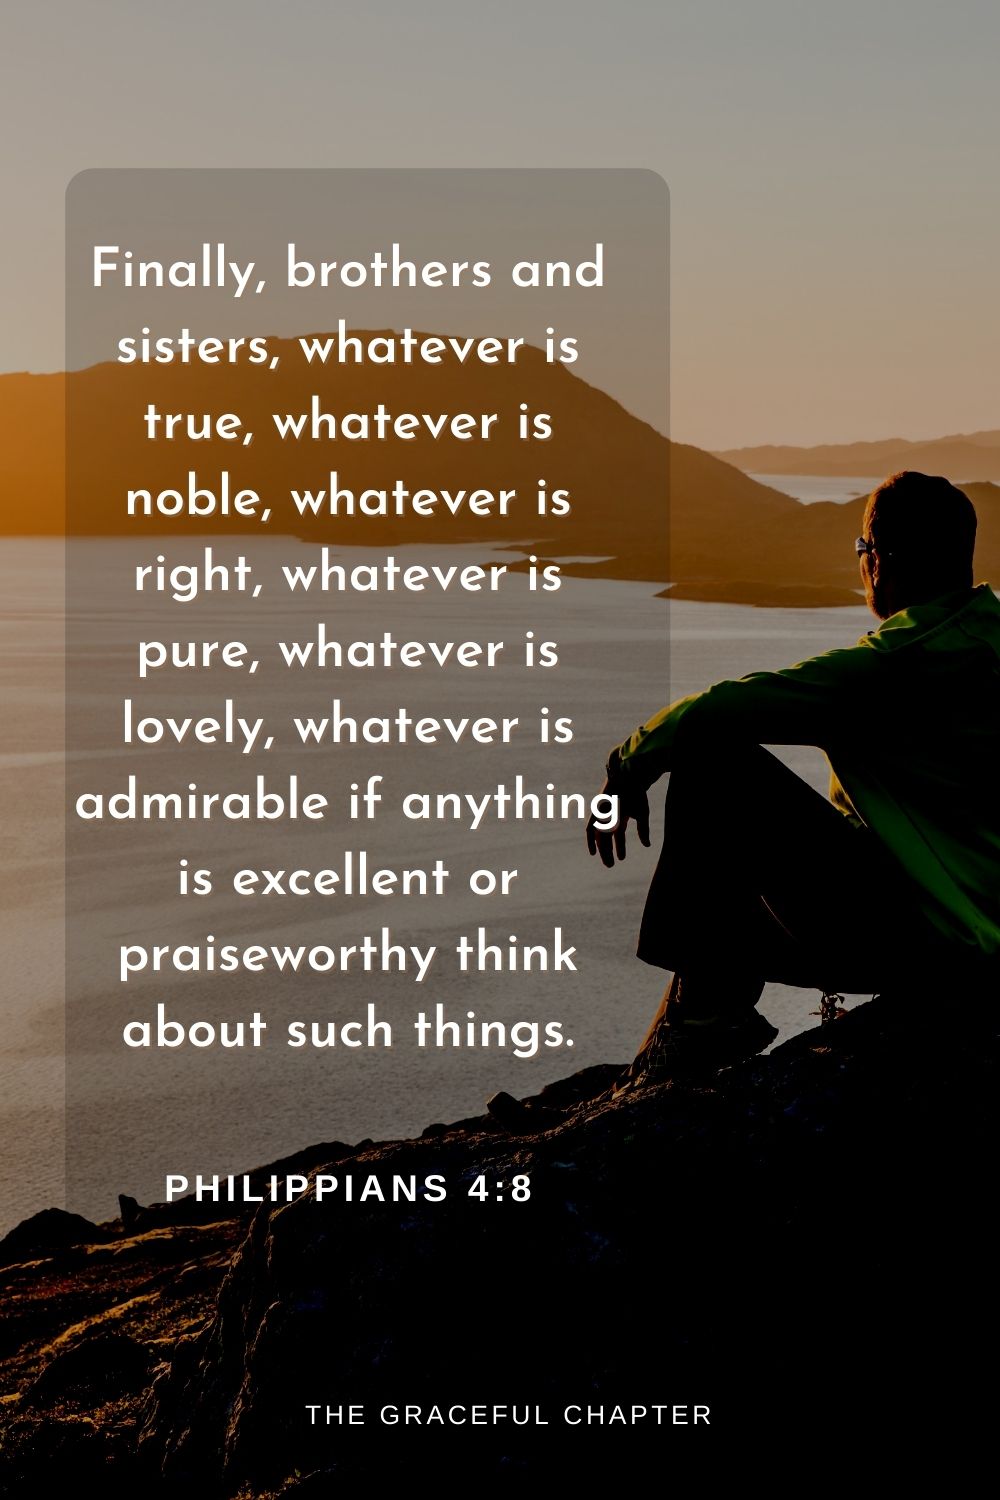 Finally, brothers and sisters, whatever is true, whatever is noble, whatever is right, whatever is pure, whatever is lovely, whatever is admirable if anything is excellent or praiseworthy think about such things.